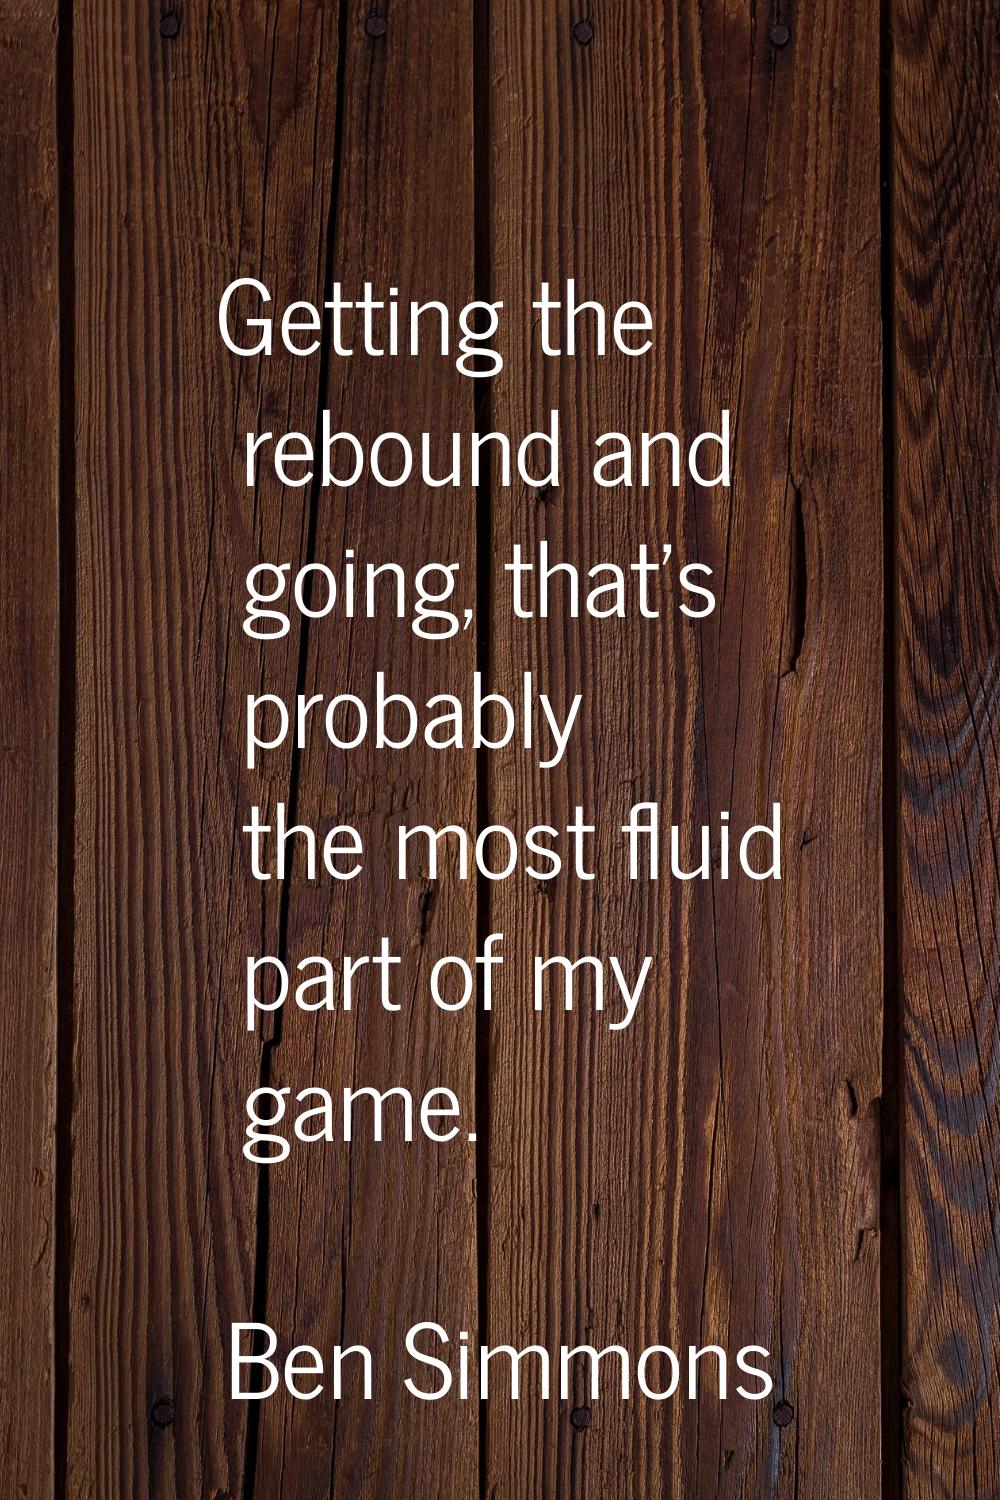 Getting the rebound and going, that's probably the most fluid part of my game.